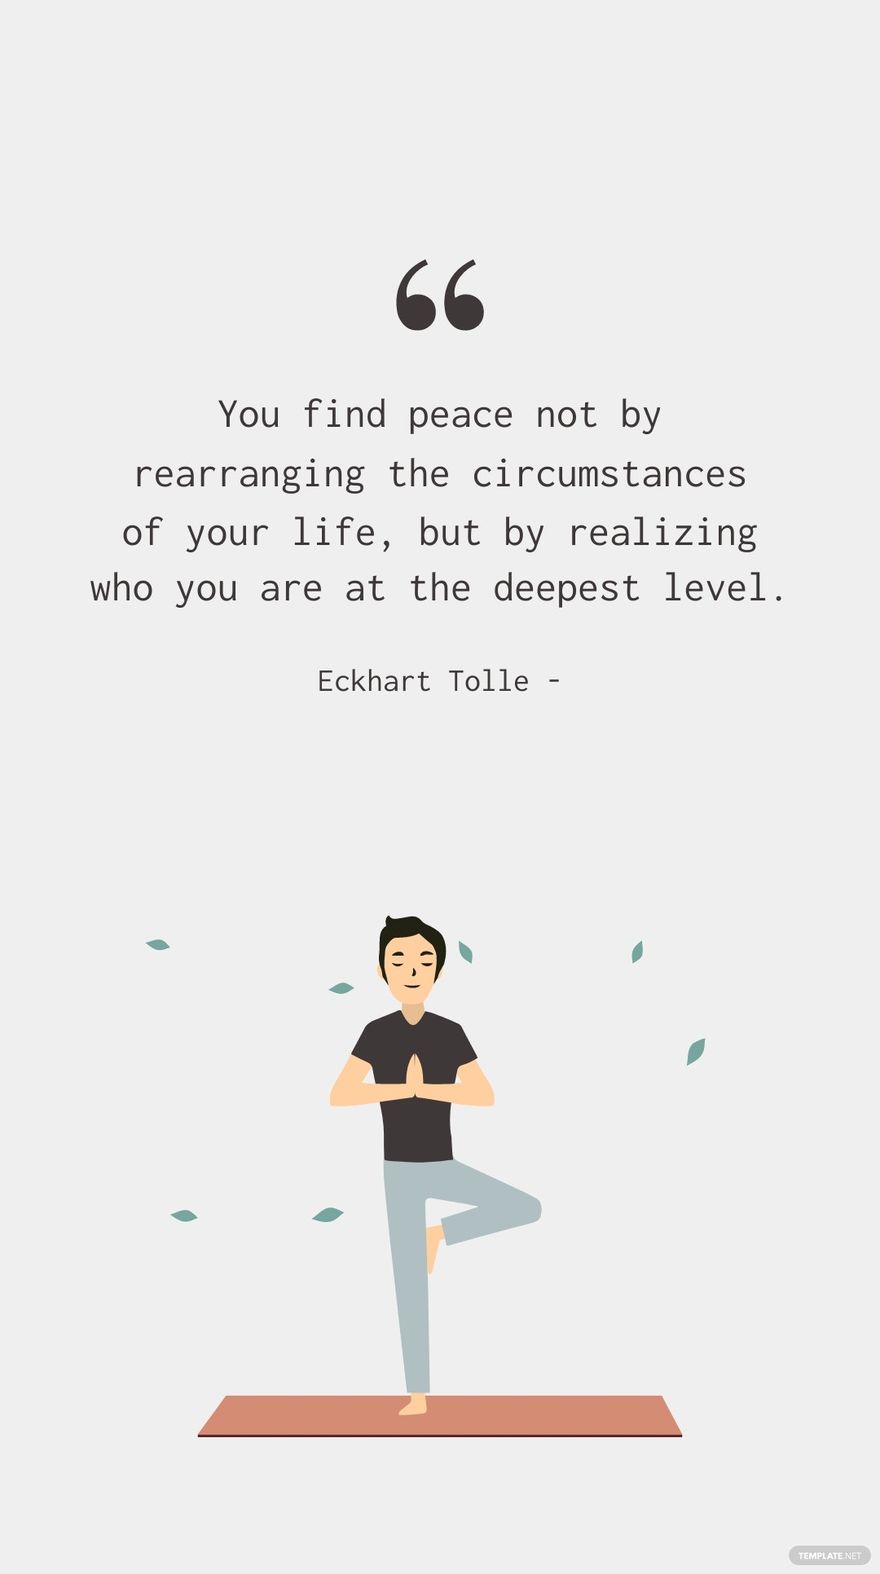 Free Eckhart Tolle - You find peace not by rearranging the circumstances of your life, but by realizing who you are at the deepest level.